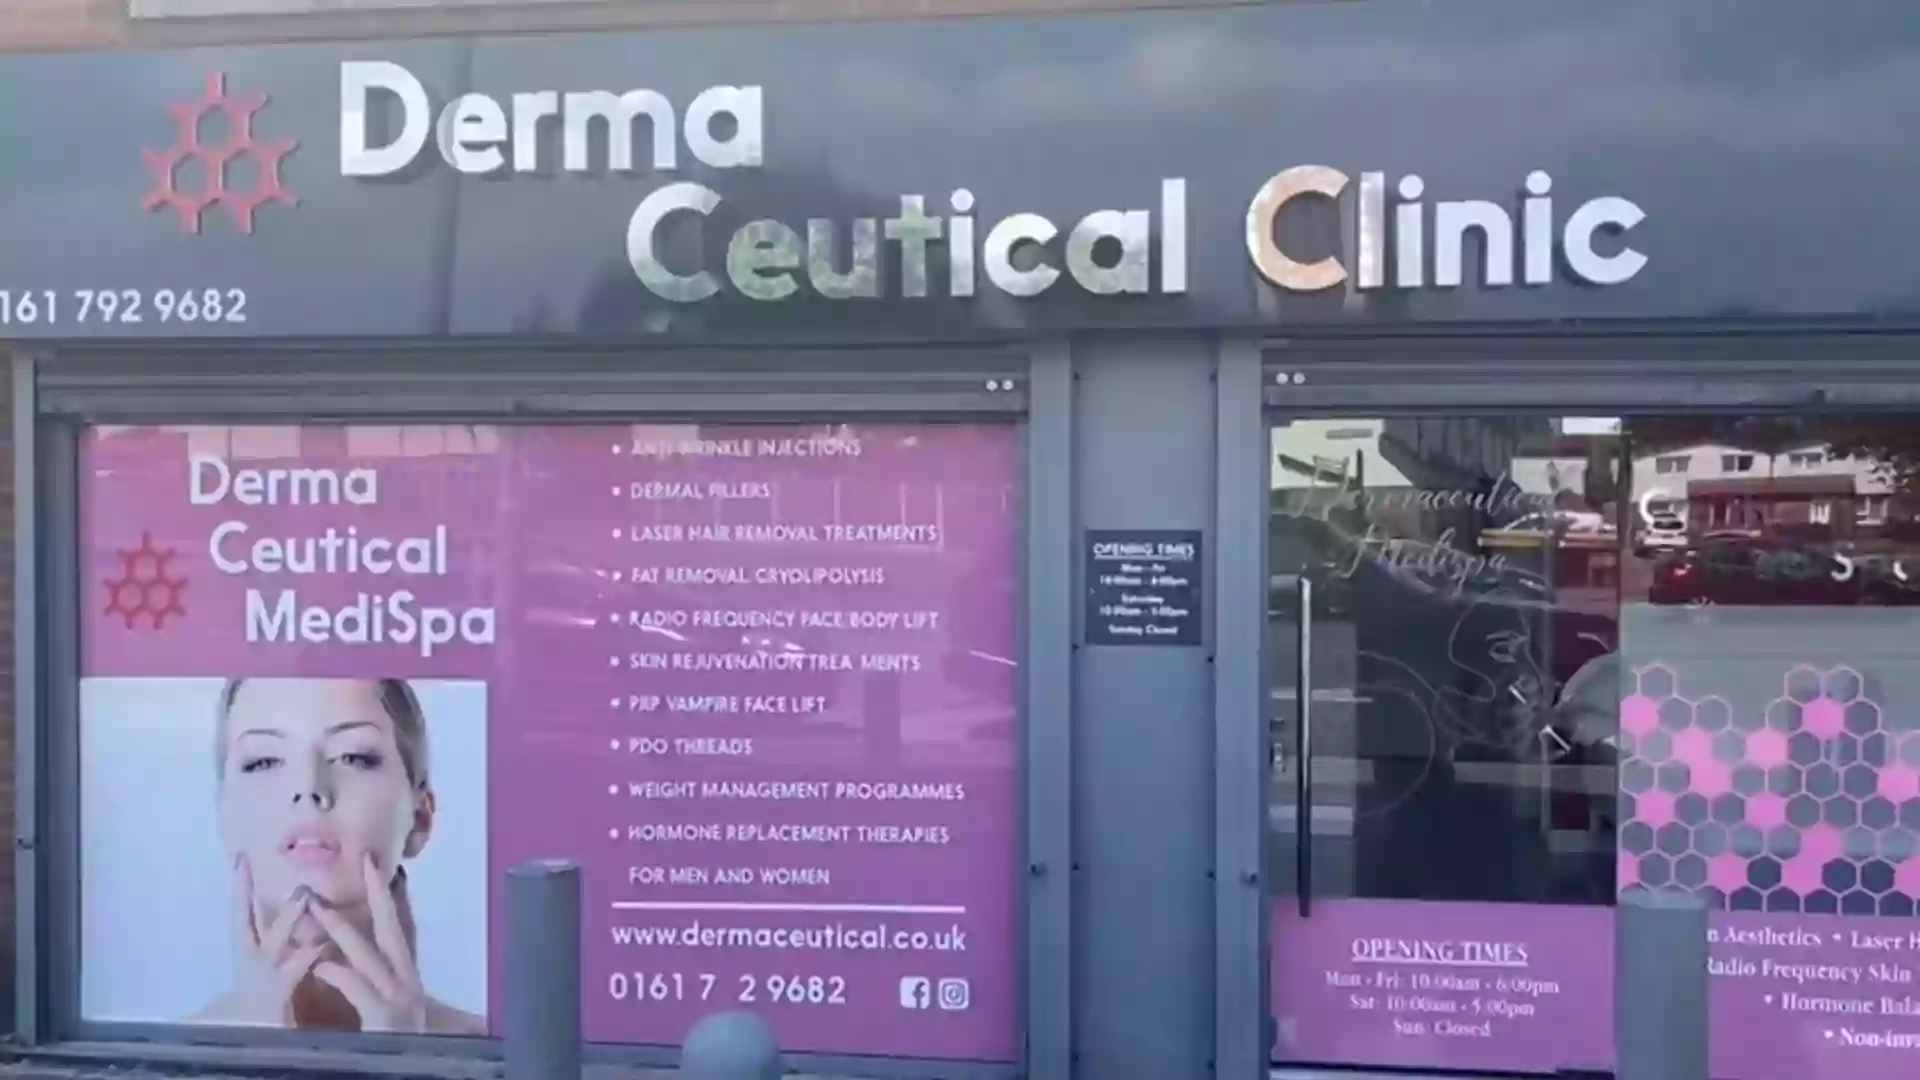 DermaCeutical Skin and Laser Clinic